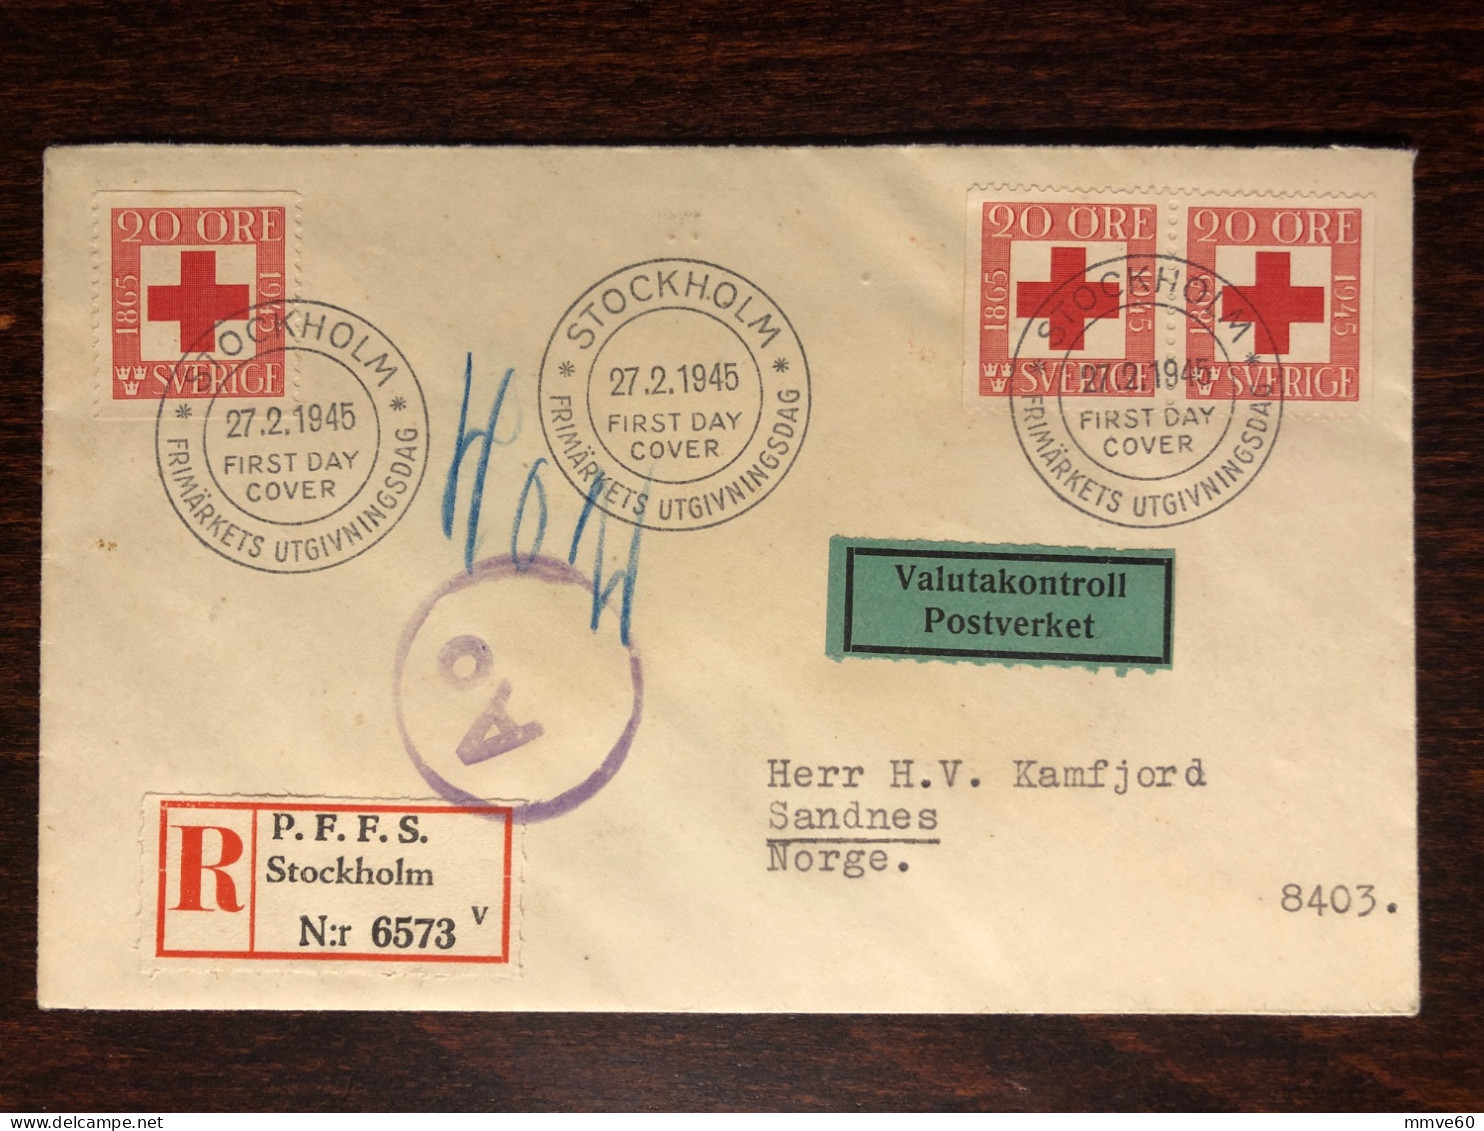 SWEDEN FDC COVER REGISTERED LETTER TO NORWAY 1945 YEAR RED CROSS HEALTH MEDICINE STAMPS - FDC